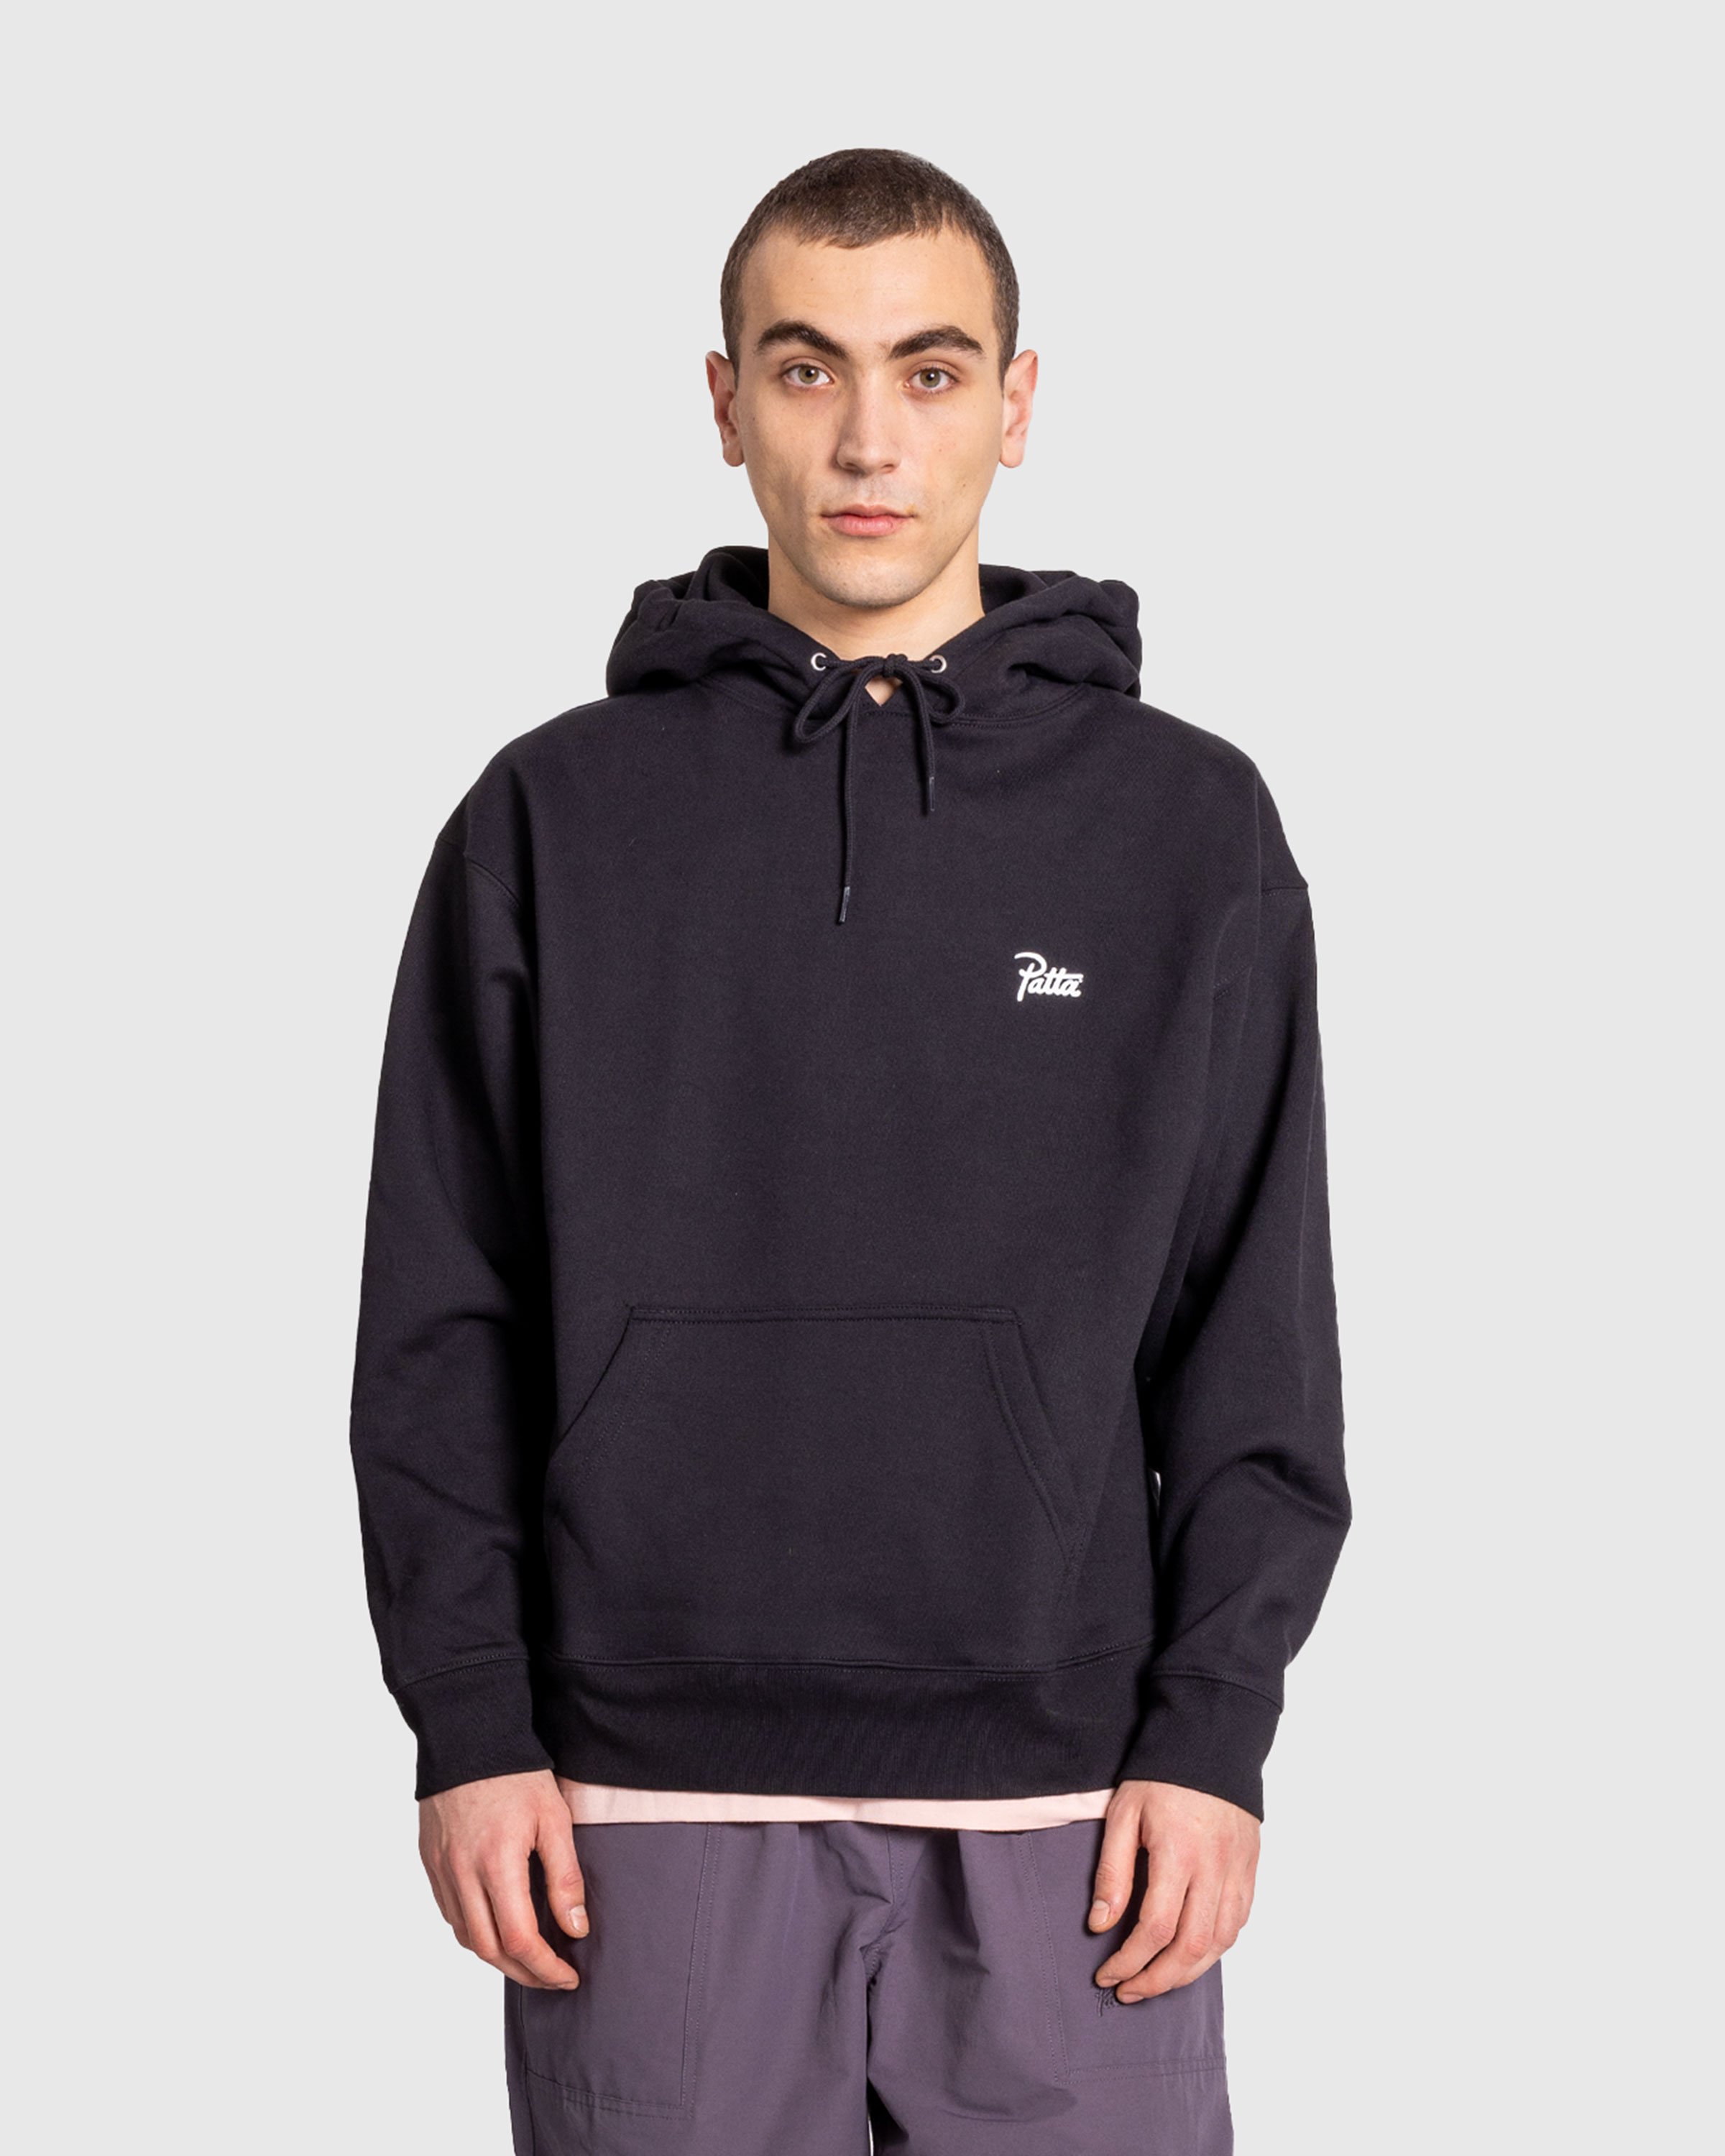 Patta - Some Like It Hot Classic Hooded Sweater Black - Clothing - Black - Image 2